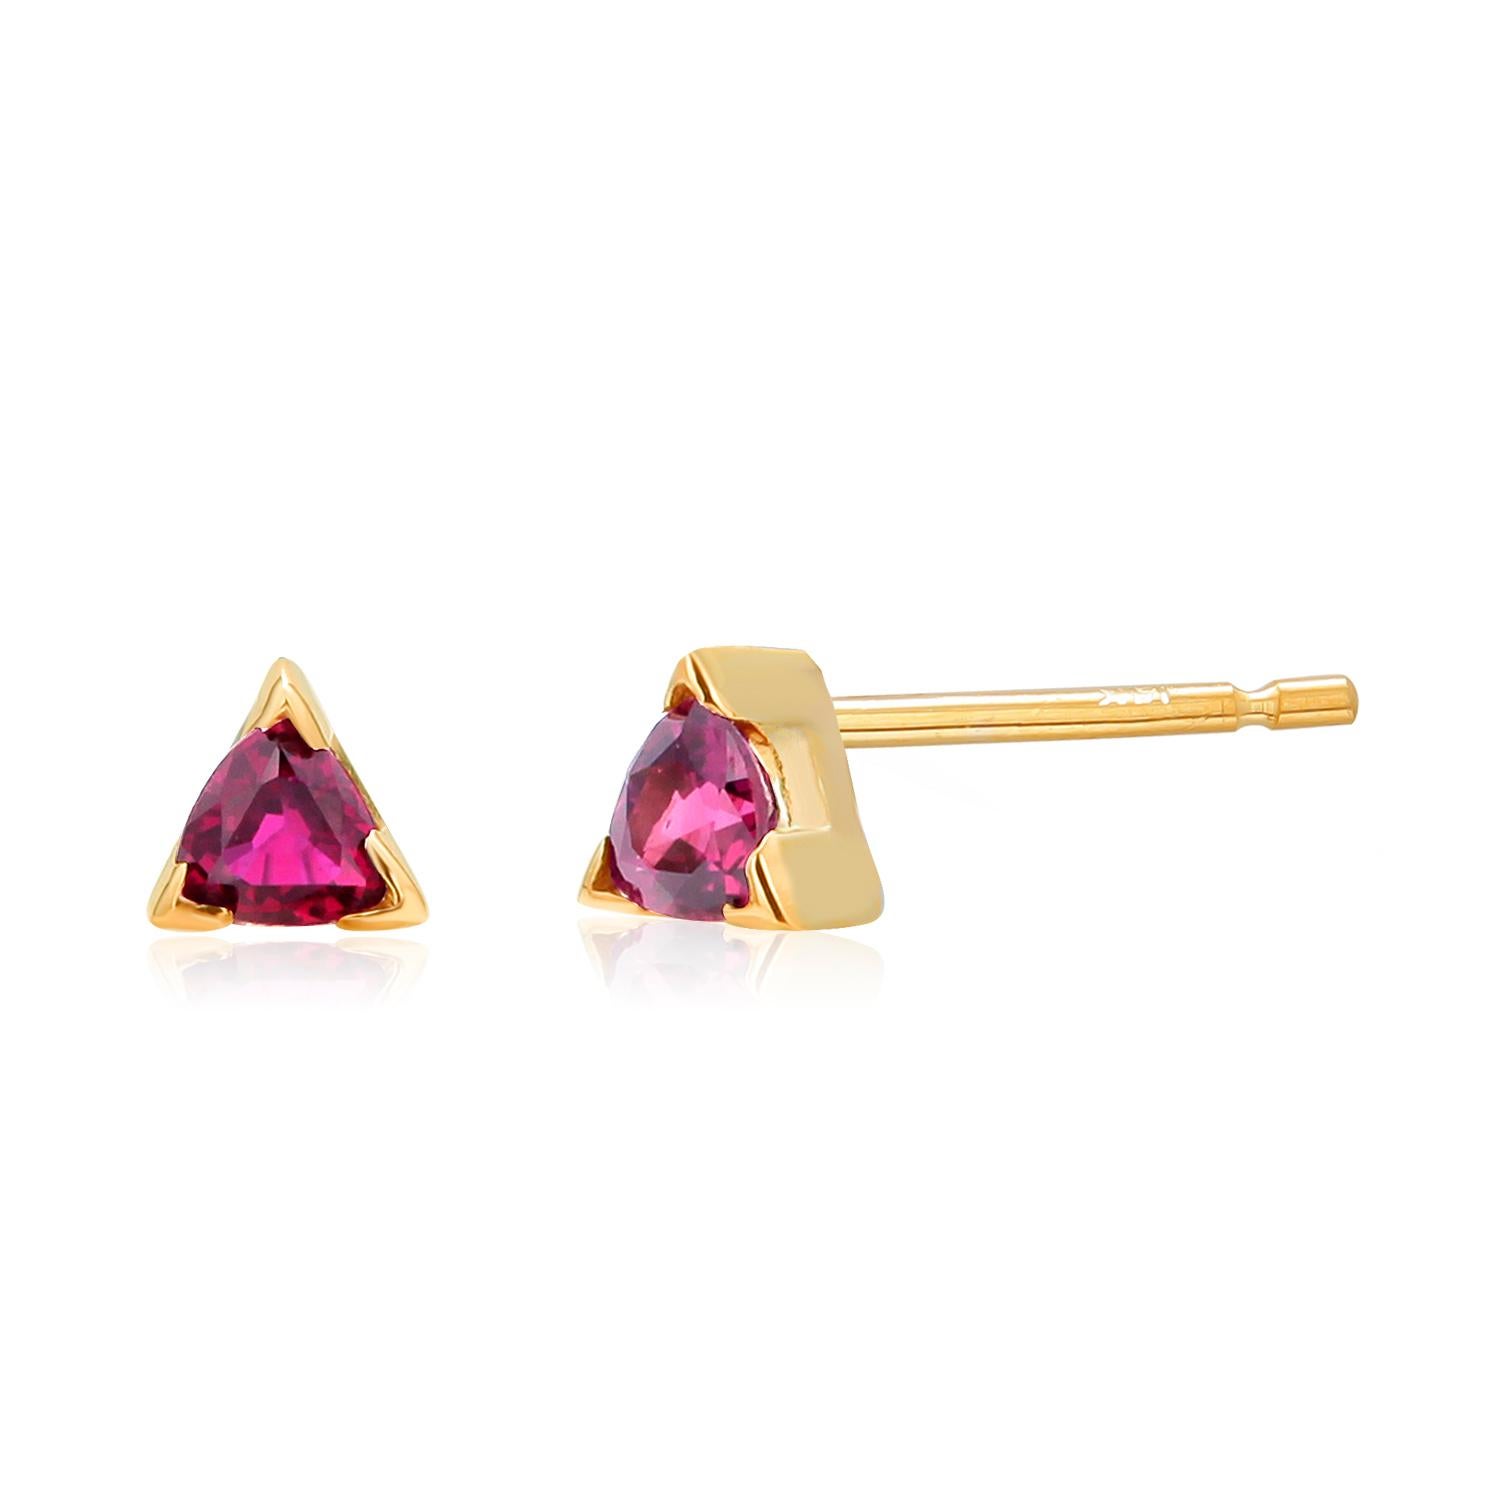 Matched Pair Round Ruby Yellow Gold Triangle Shaped Stud Earrings 1